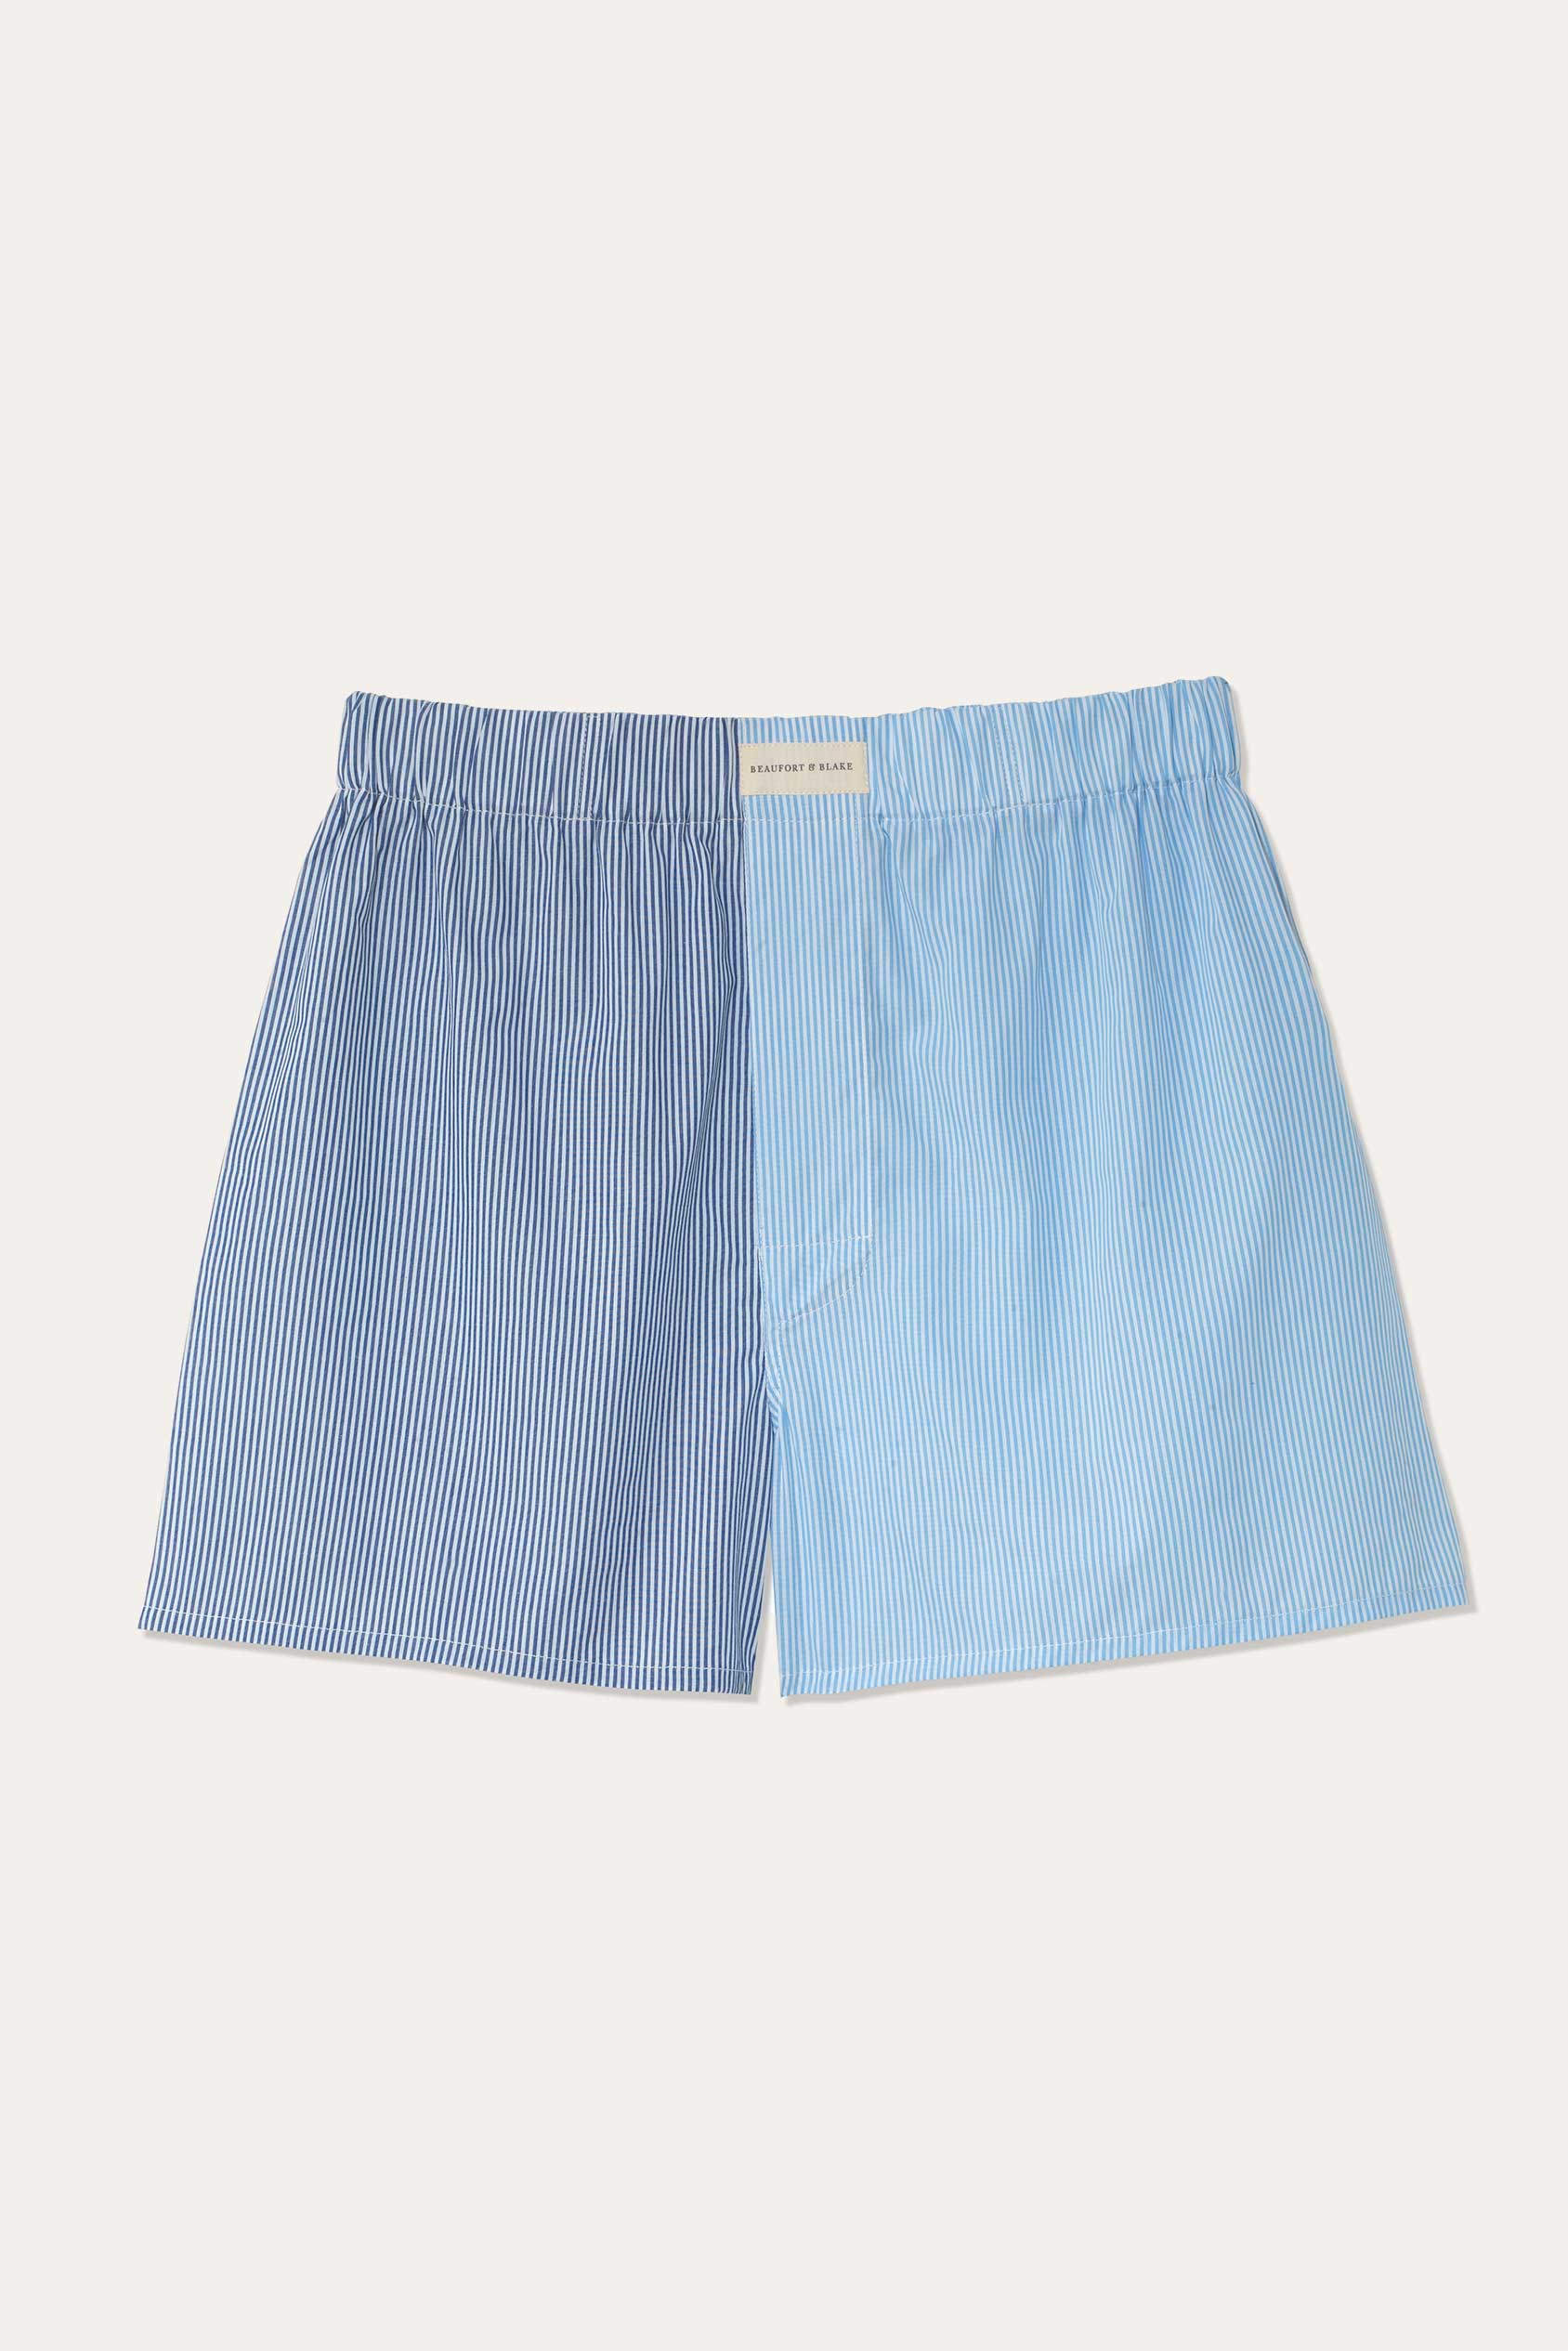 Fine stripe blue colour block poplin boxers. It's time to upgrade your top drawer with a pair of stripy Beaufort boxers. They're cut from pure cotton with a soft elasticated waist. Made in Portugal. Machine Wash. Underwear. Size S, M, L, XL, XXL.